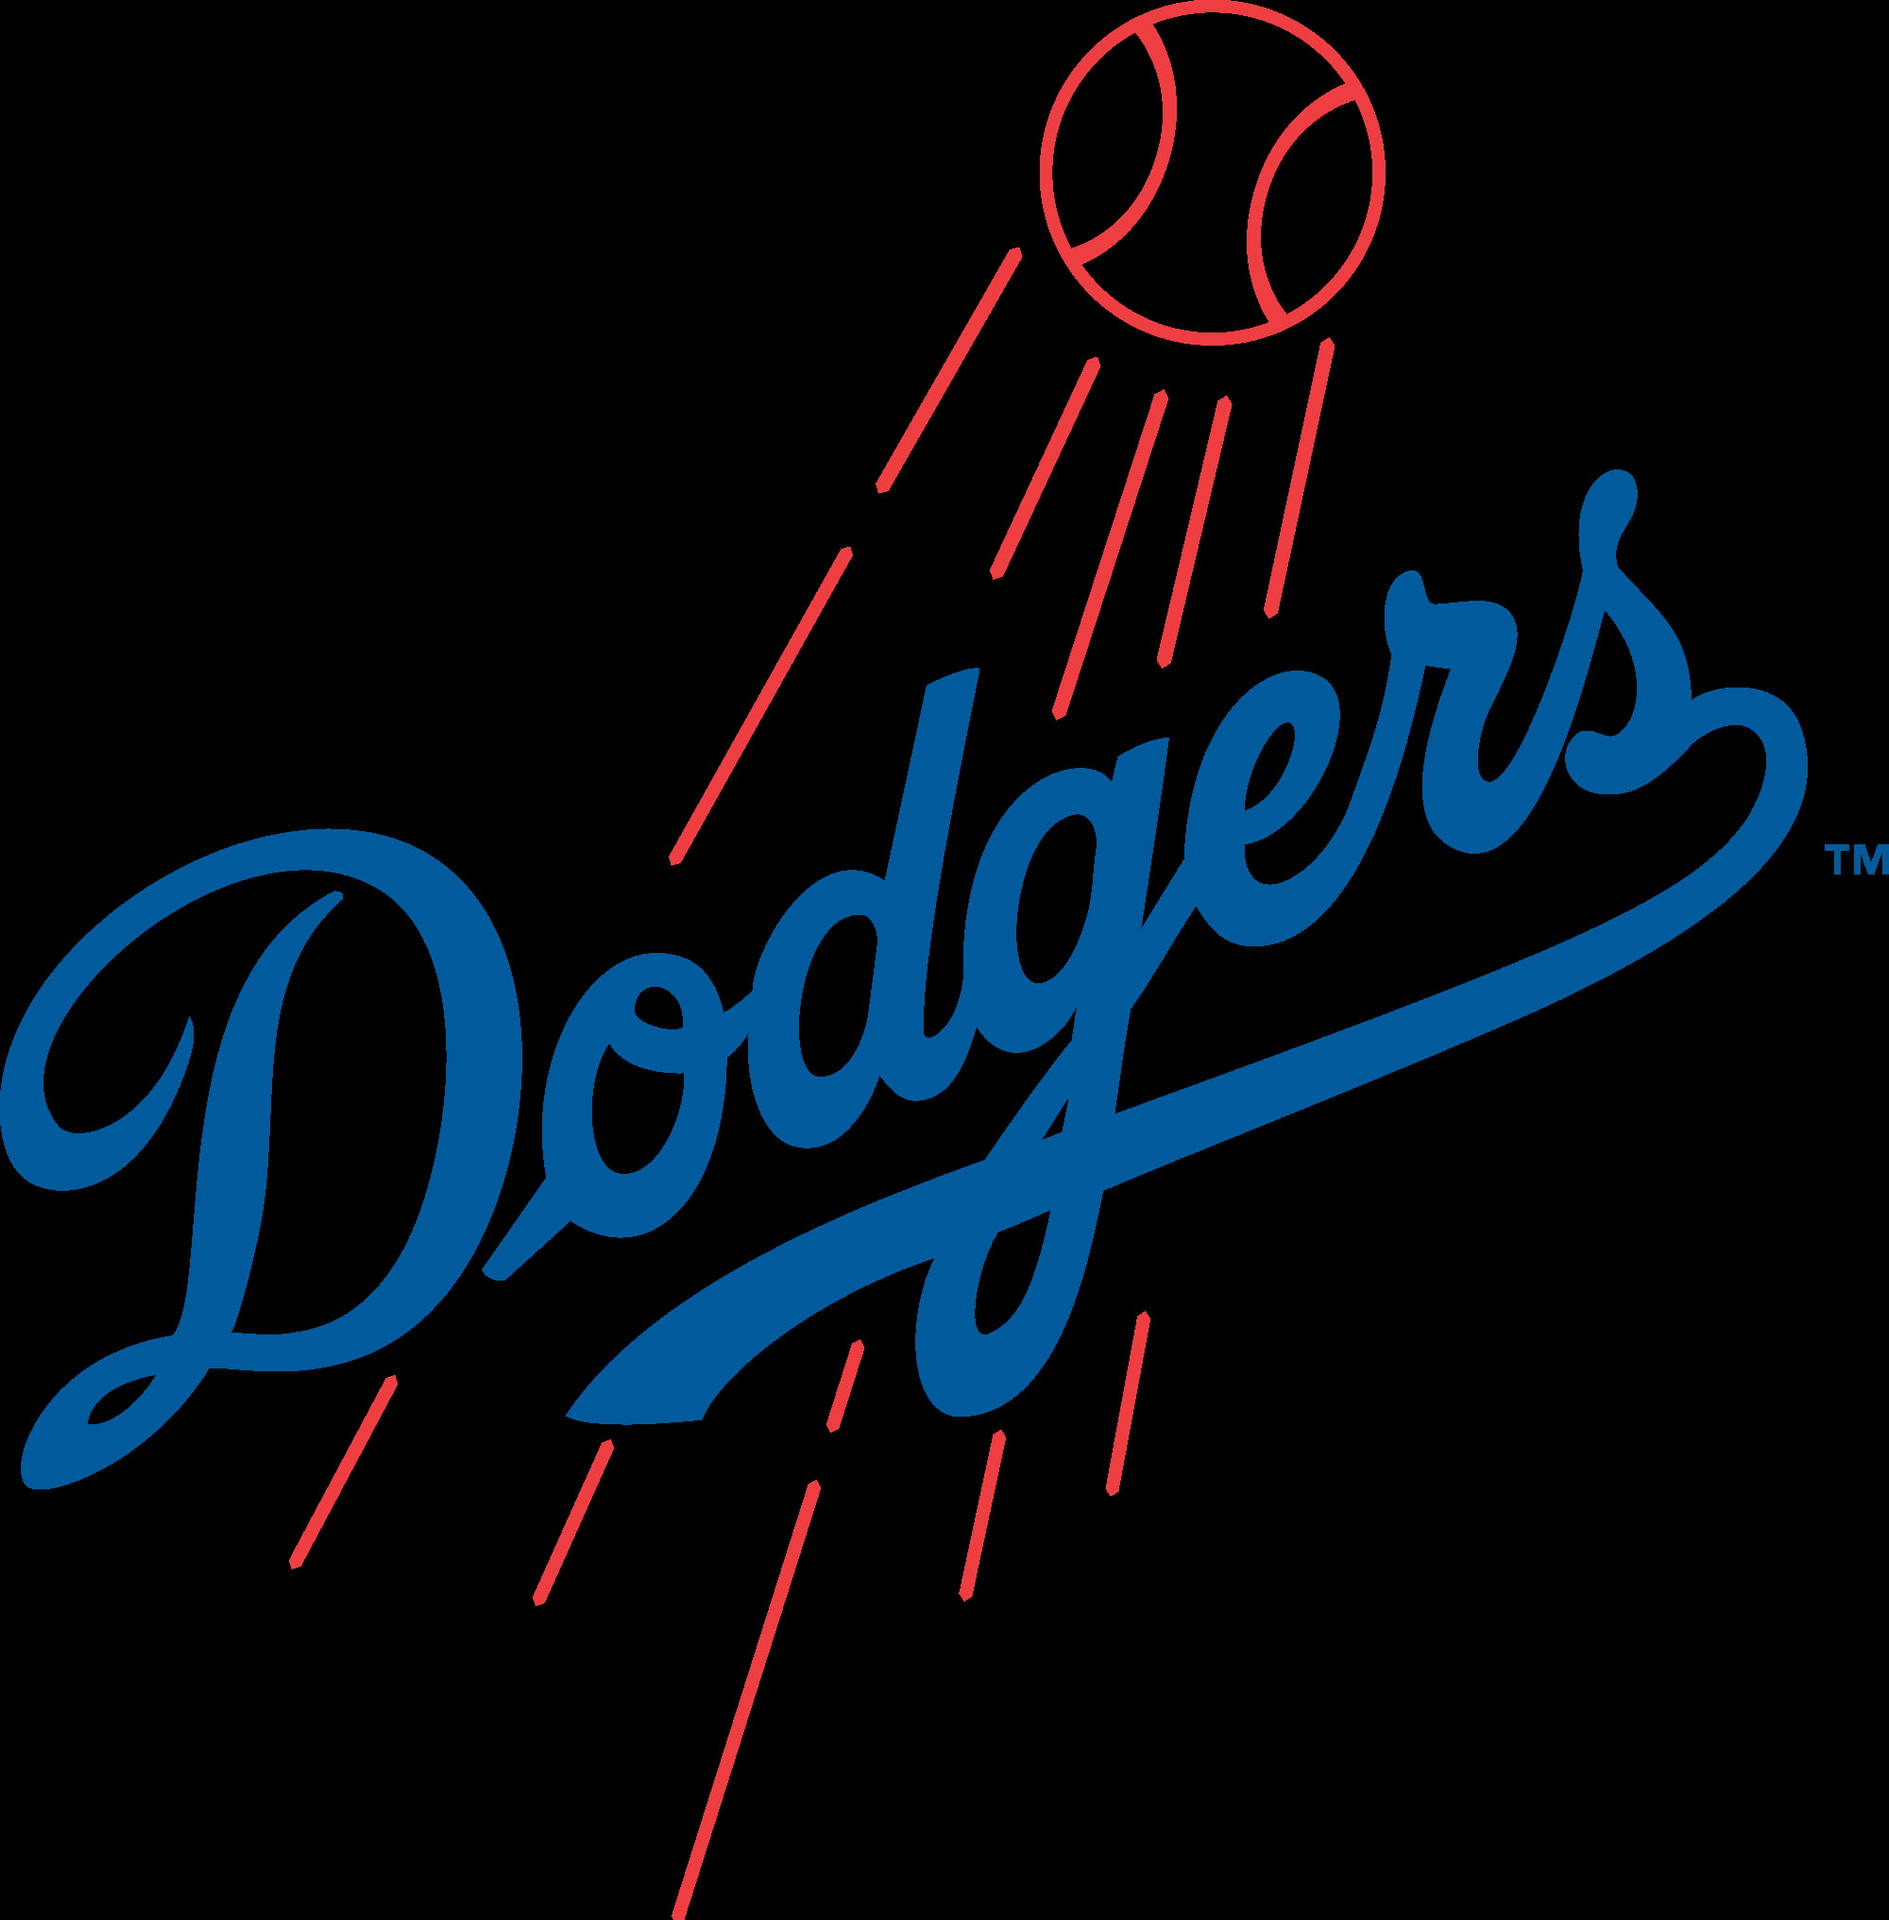 Download Los Angeles Dodgers Luminous Red Ball Wallpaper